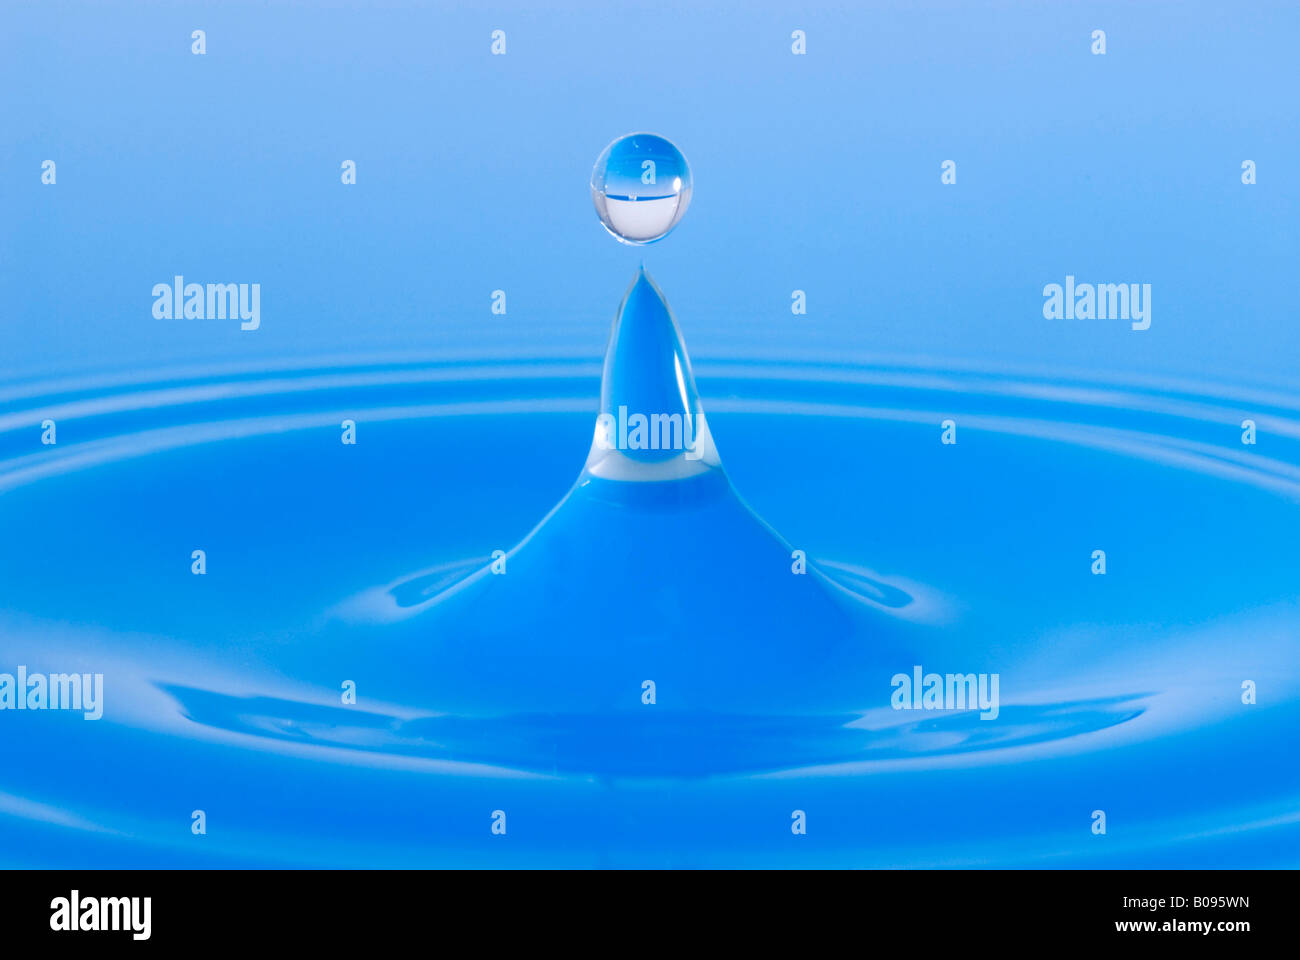 Perfectly suspended blue water drop on the water's surface Stock Photo